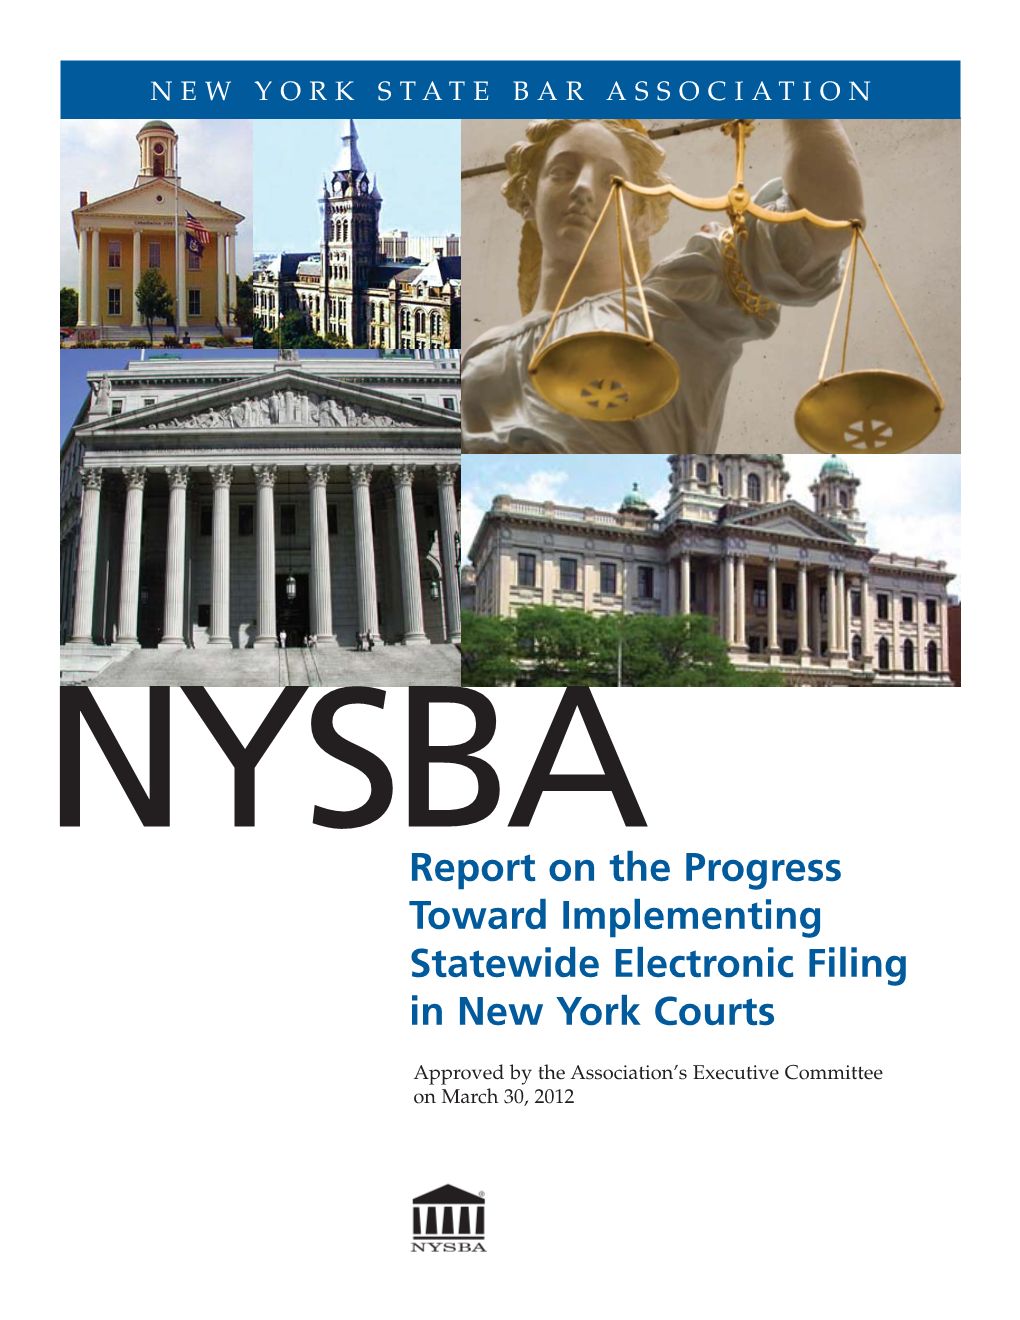 Progress Toward Implementing Statewide Electronic Filing in New York Courts.Indd